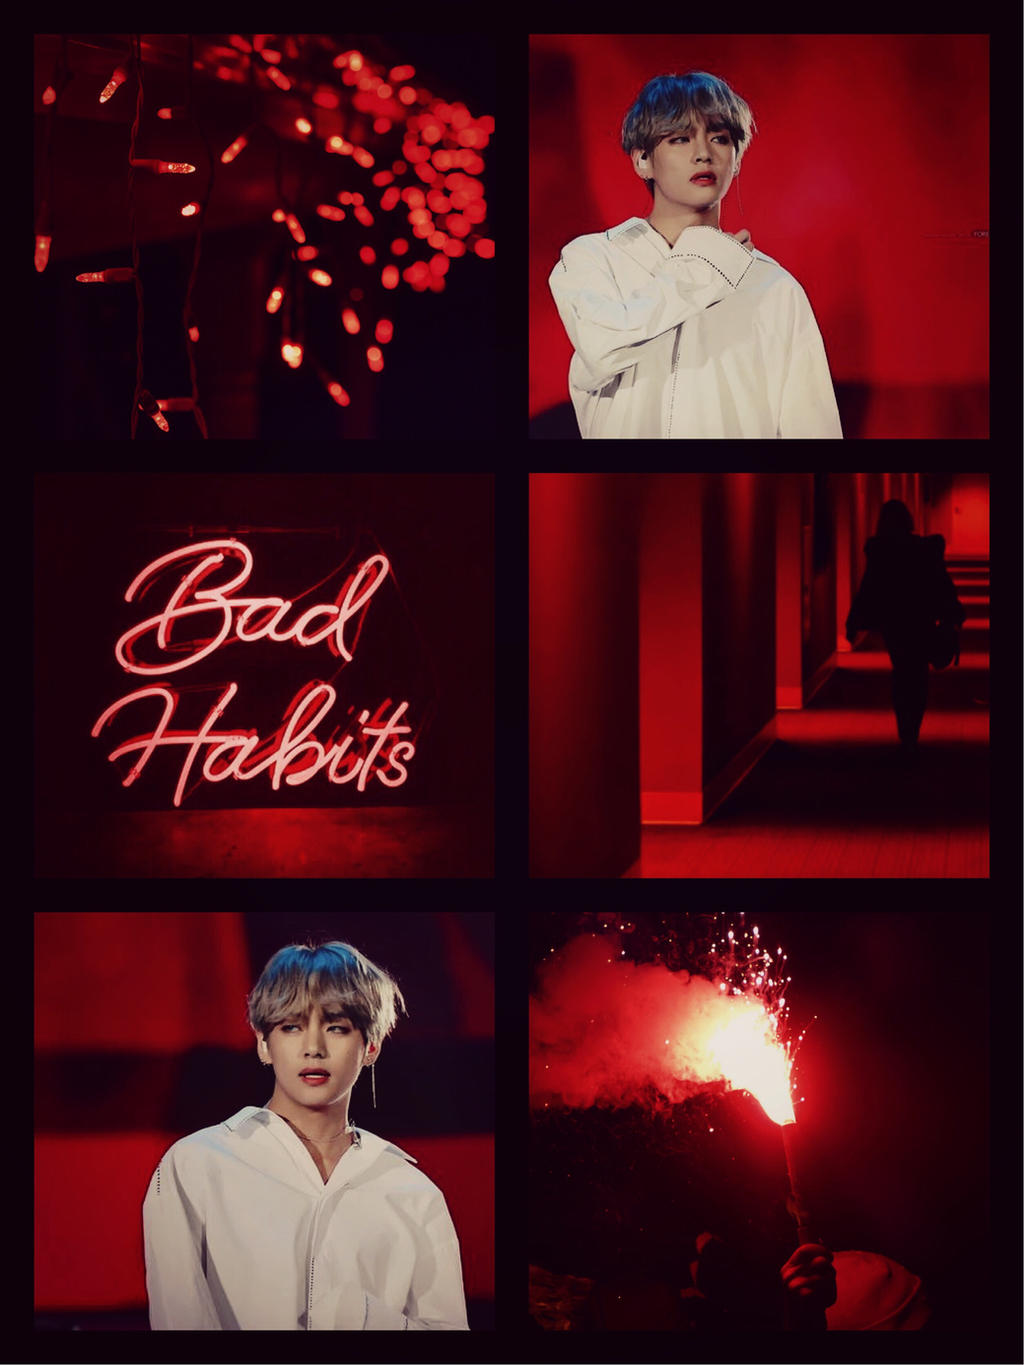 BTS - V : Red + Black Aesthetic by Beaxh-Bxtch on DeviantArt